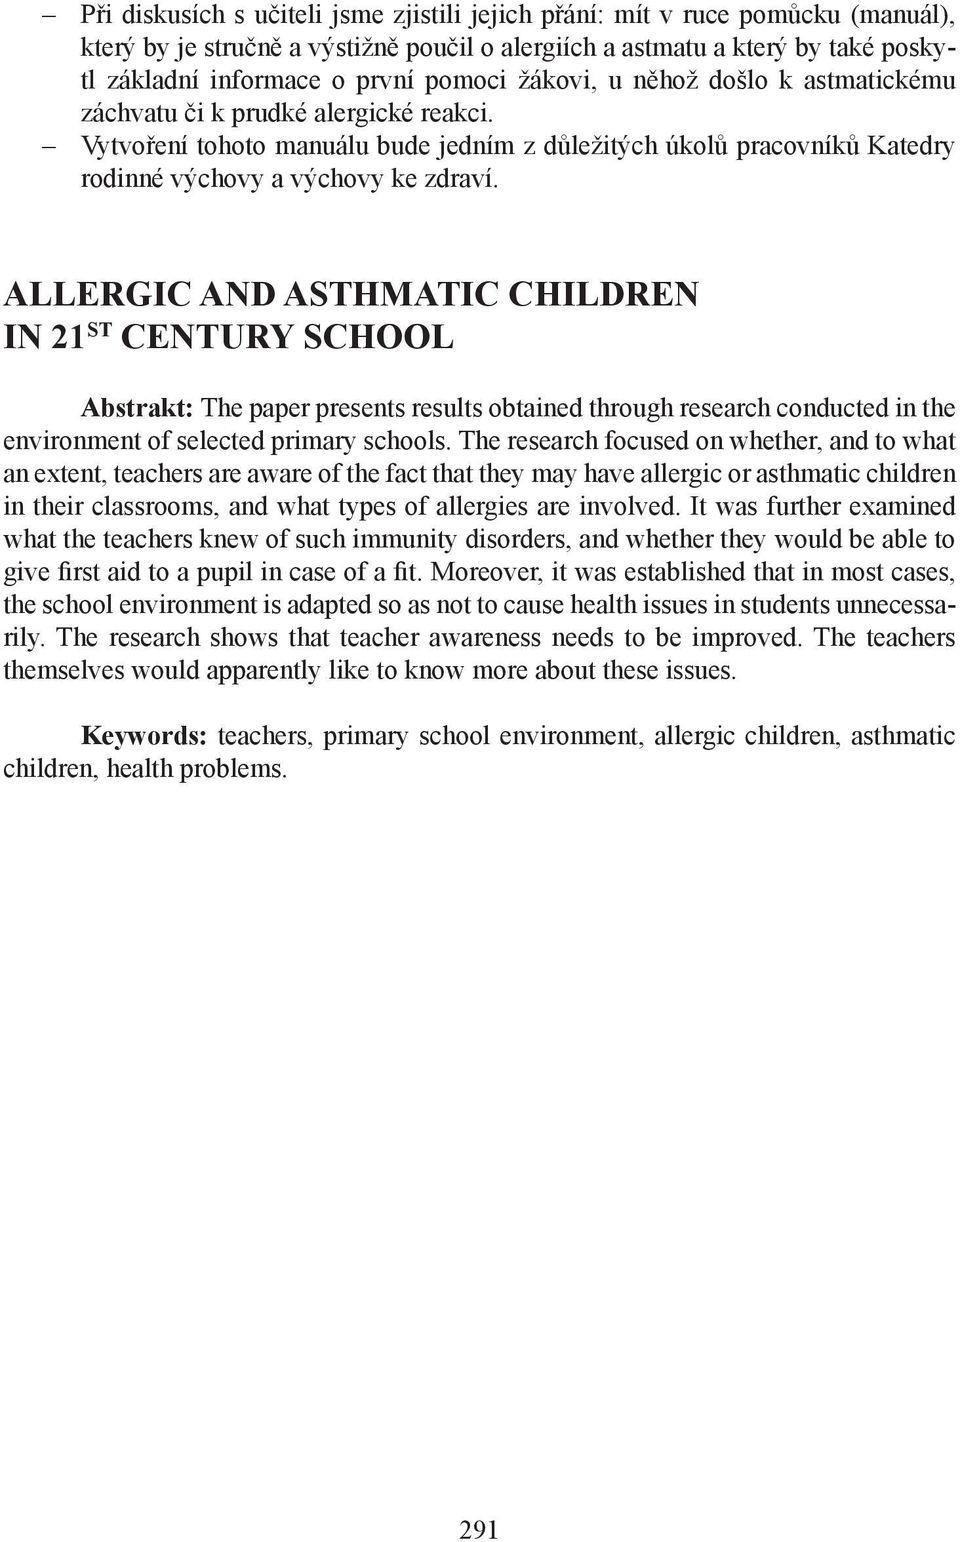 ALLERGIC AND ASTHMATIC CHILDREN IN 21 ST CENTURY SCHOOL Abstrakt: The paper presents results obtained through research conducted in the environment of selected primary schools.